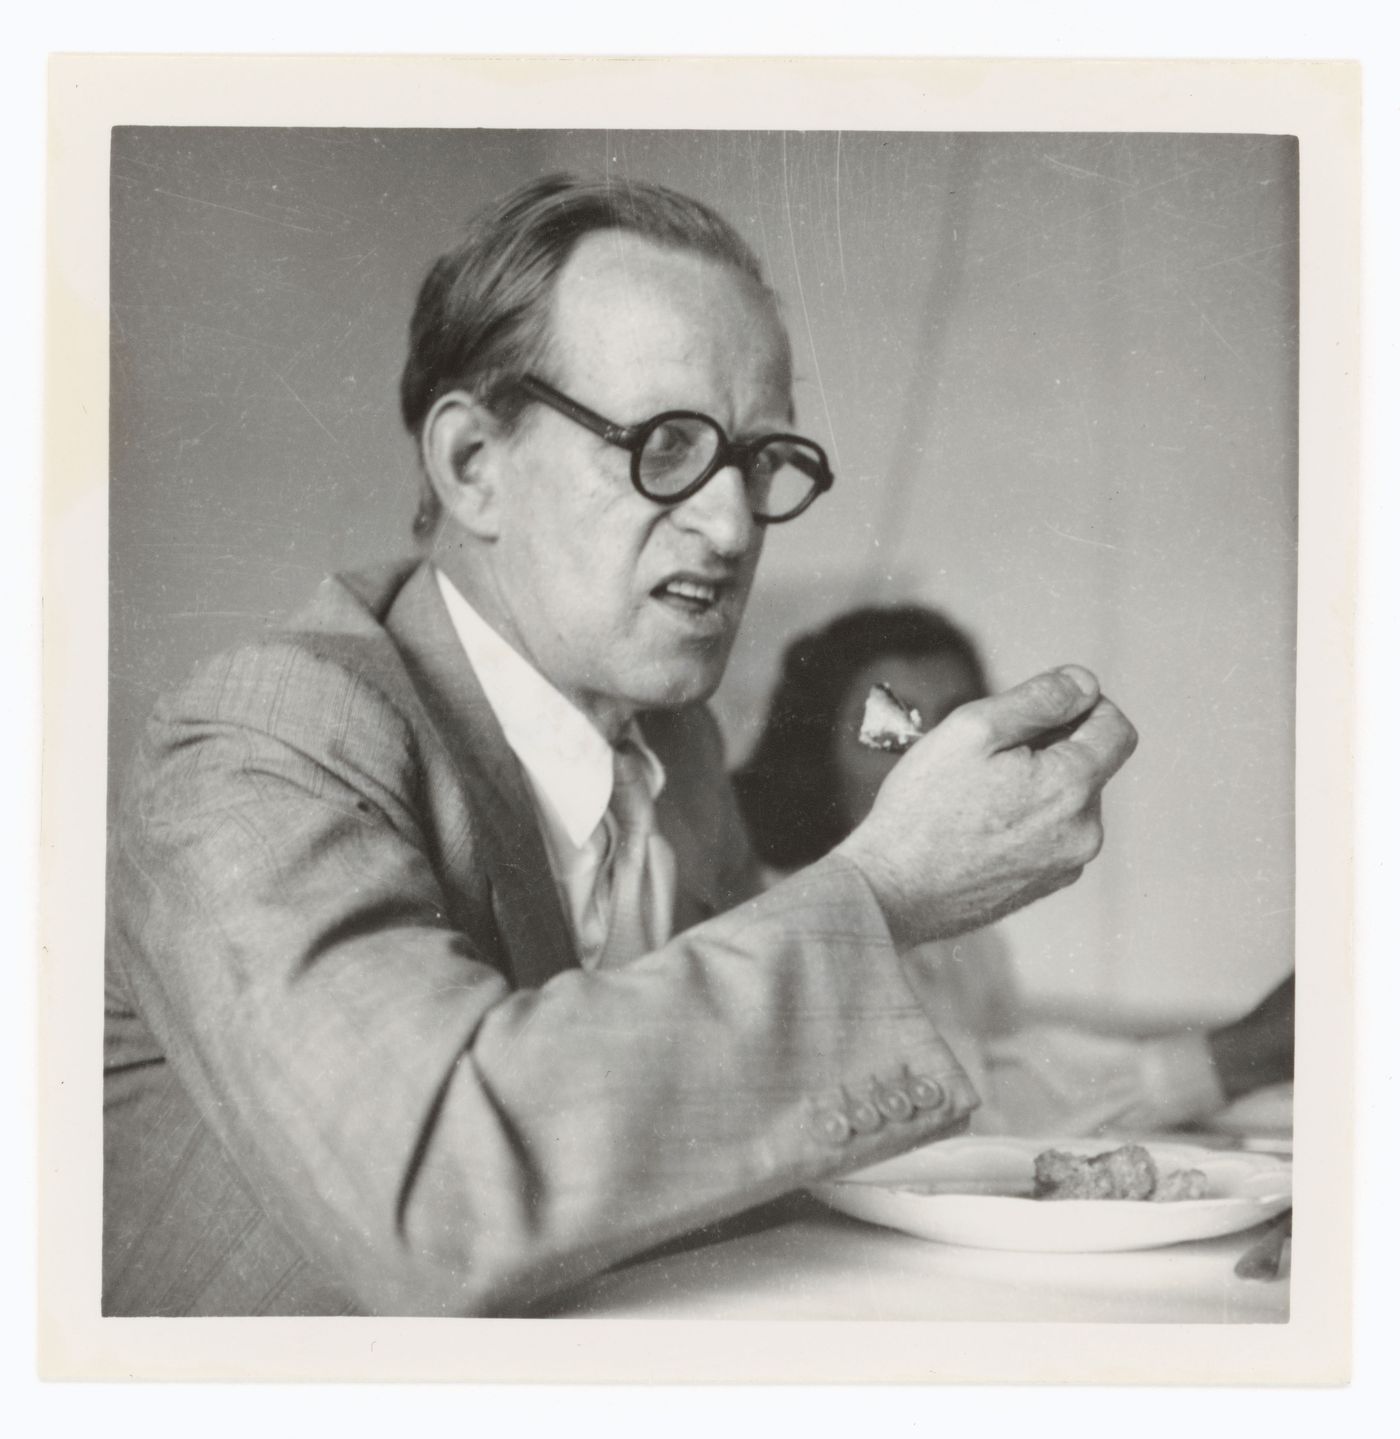 Portrait of Maxwell Fry eating, possibly in Chandigarh, India